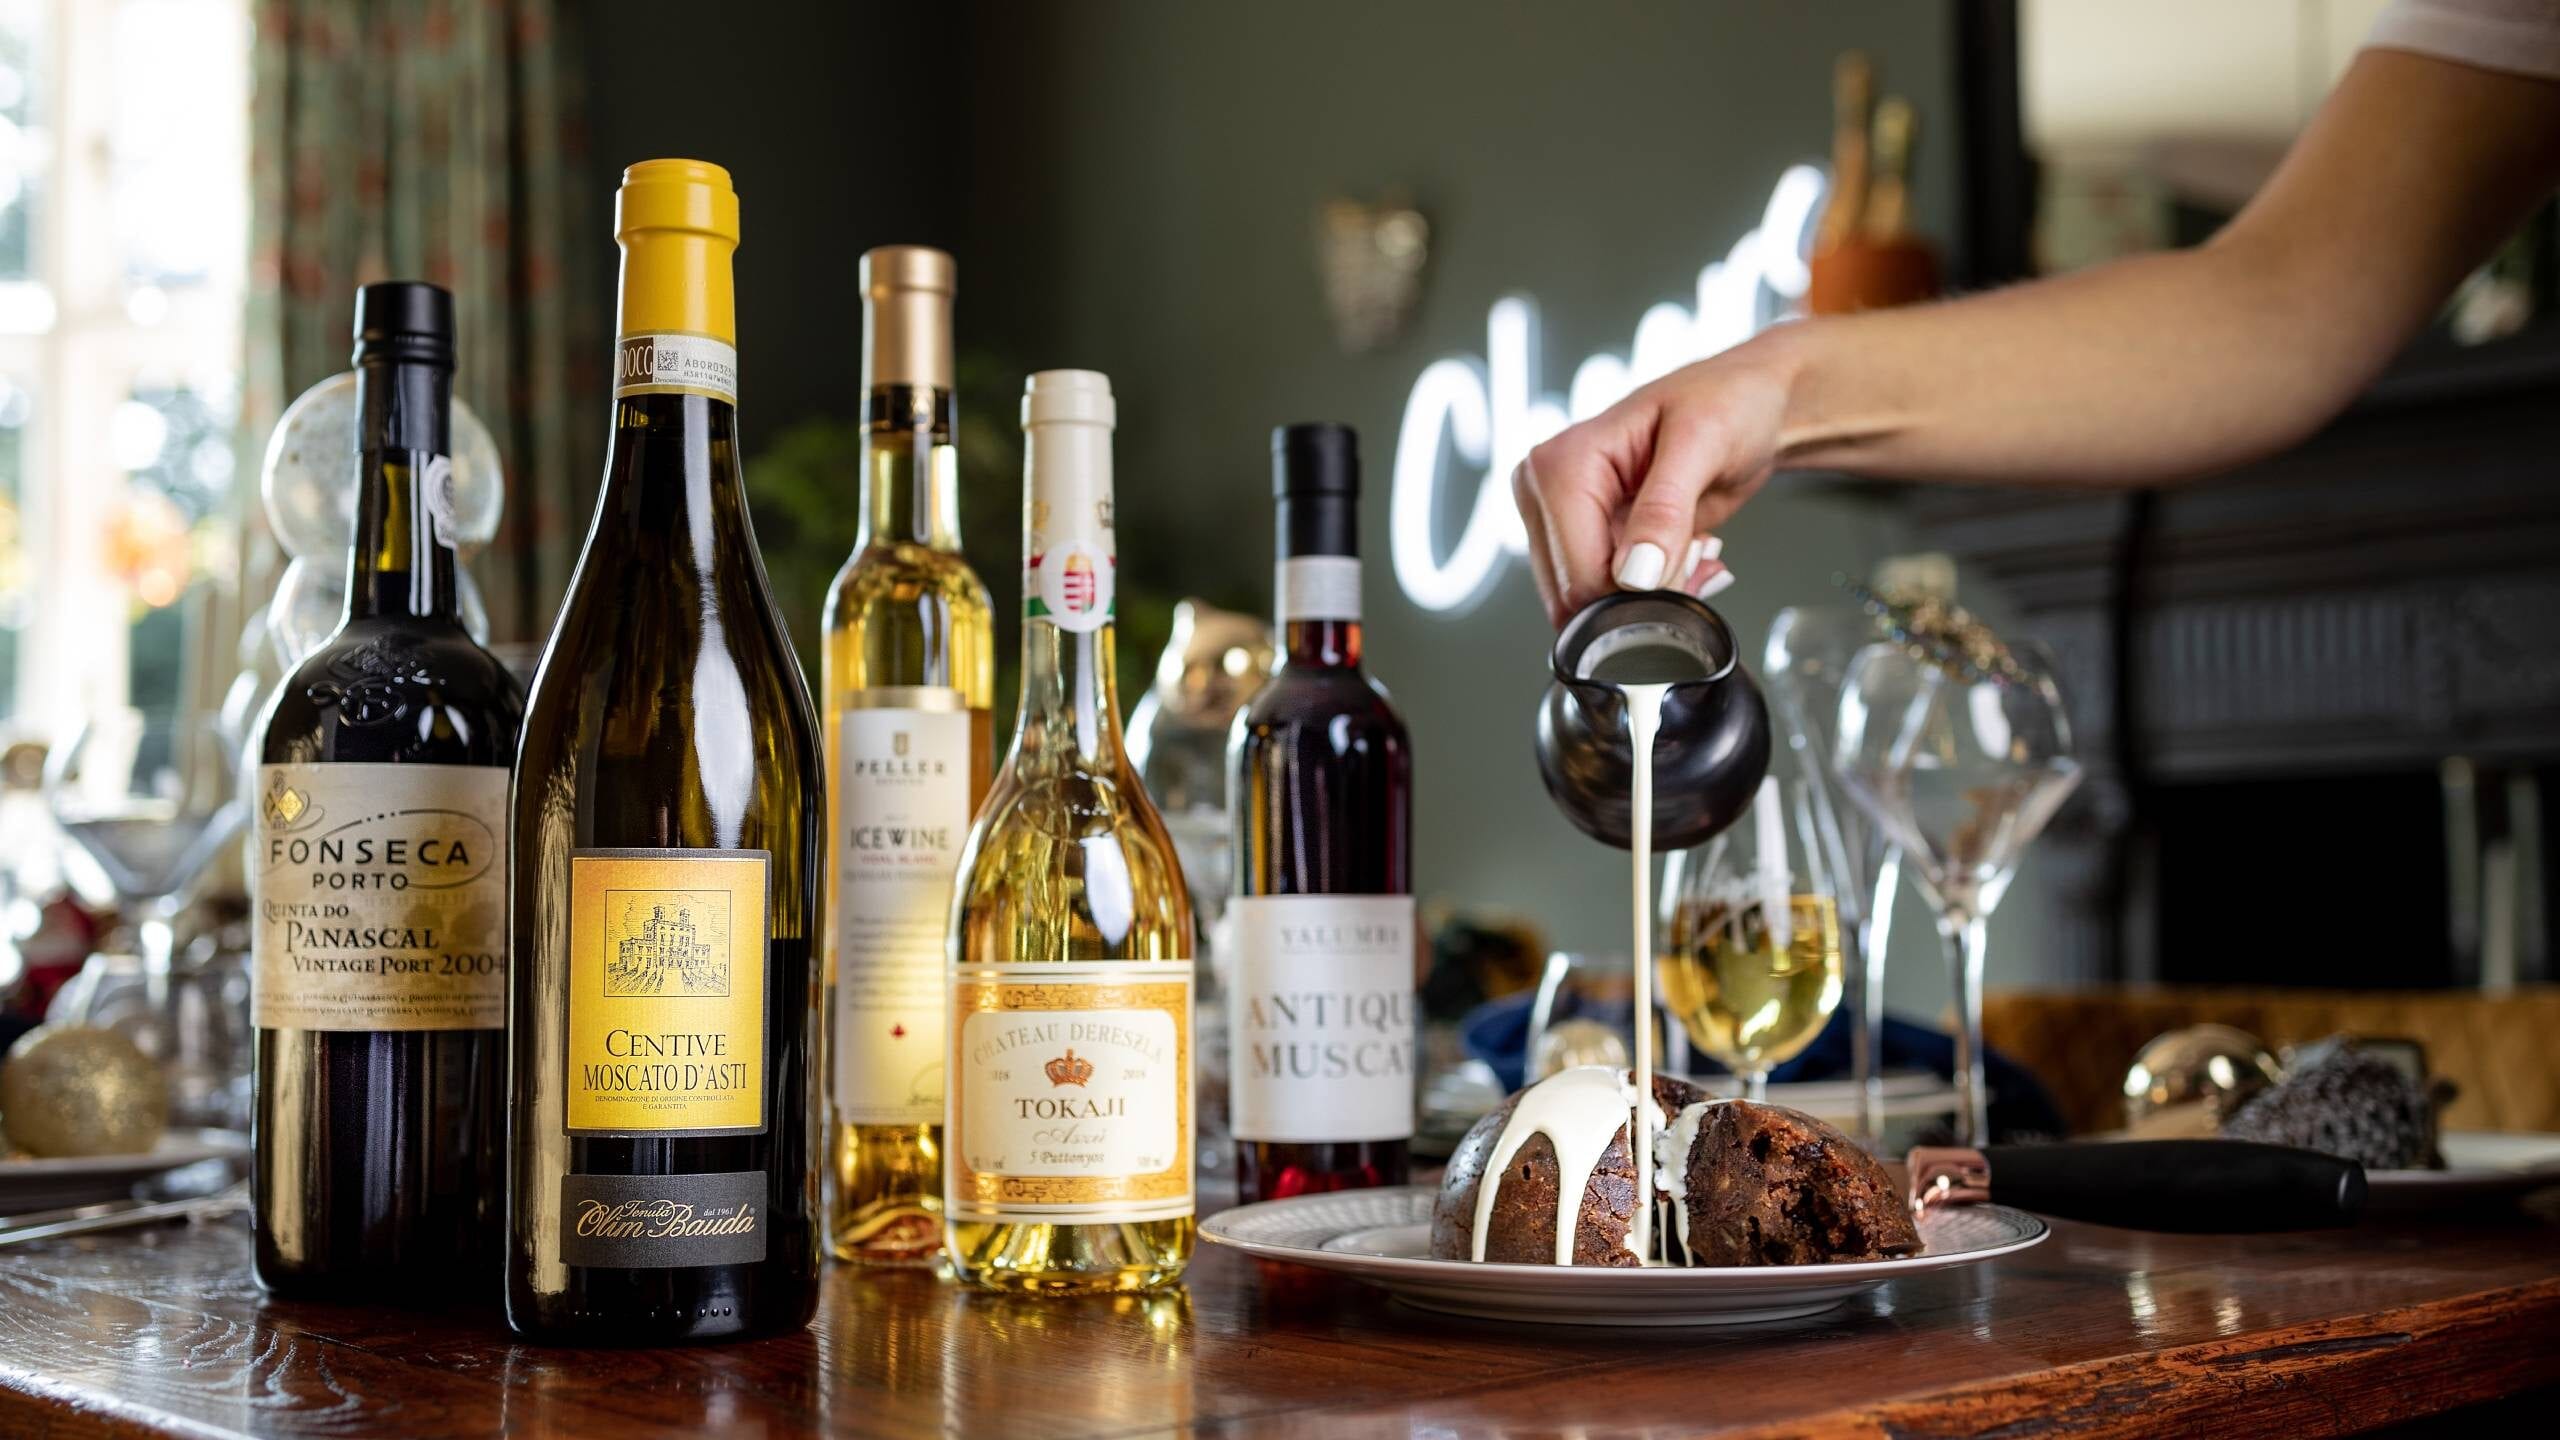 Dessert Wines for Your Christmas Pudding and Festive Treats | Virgin Wines